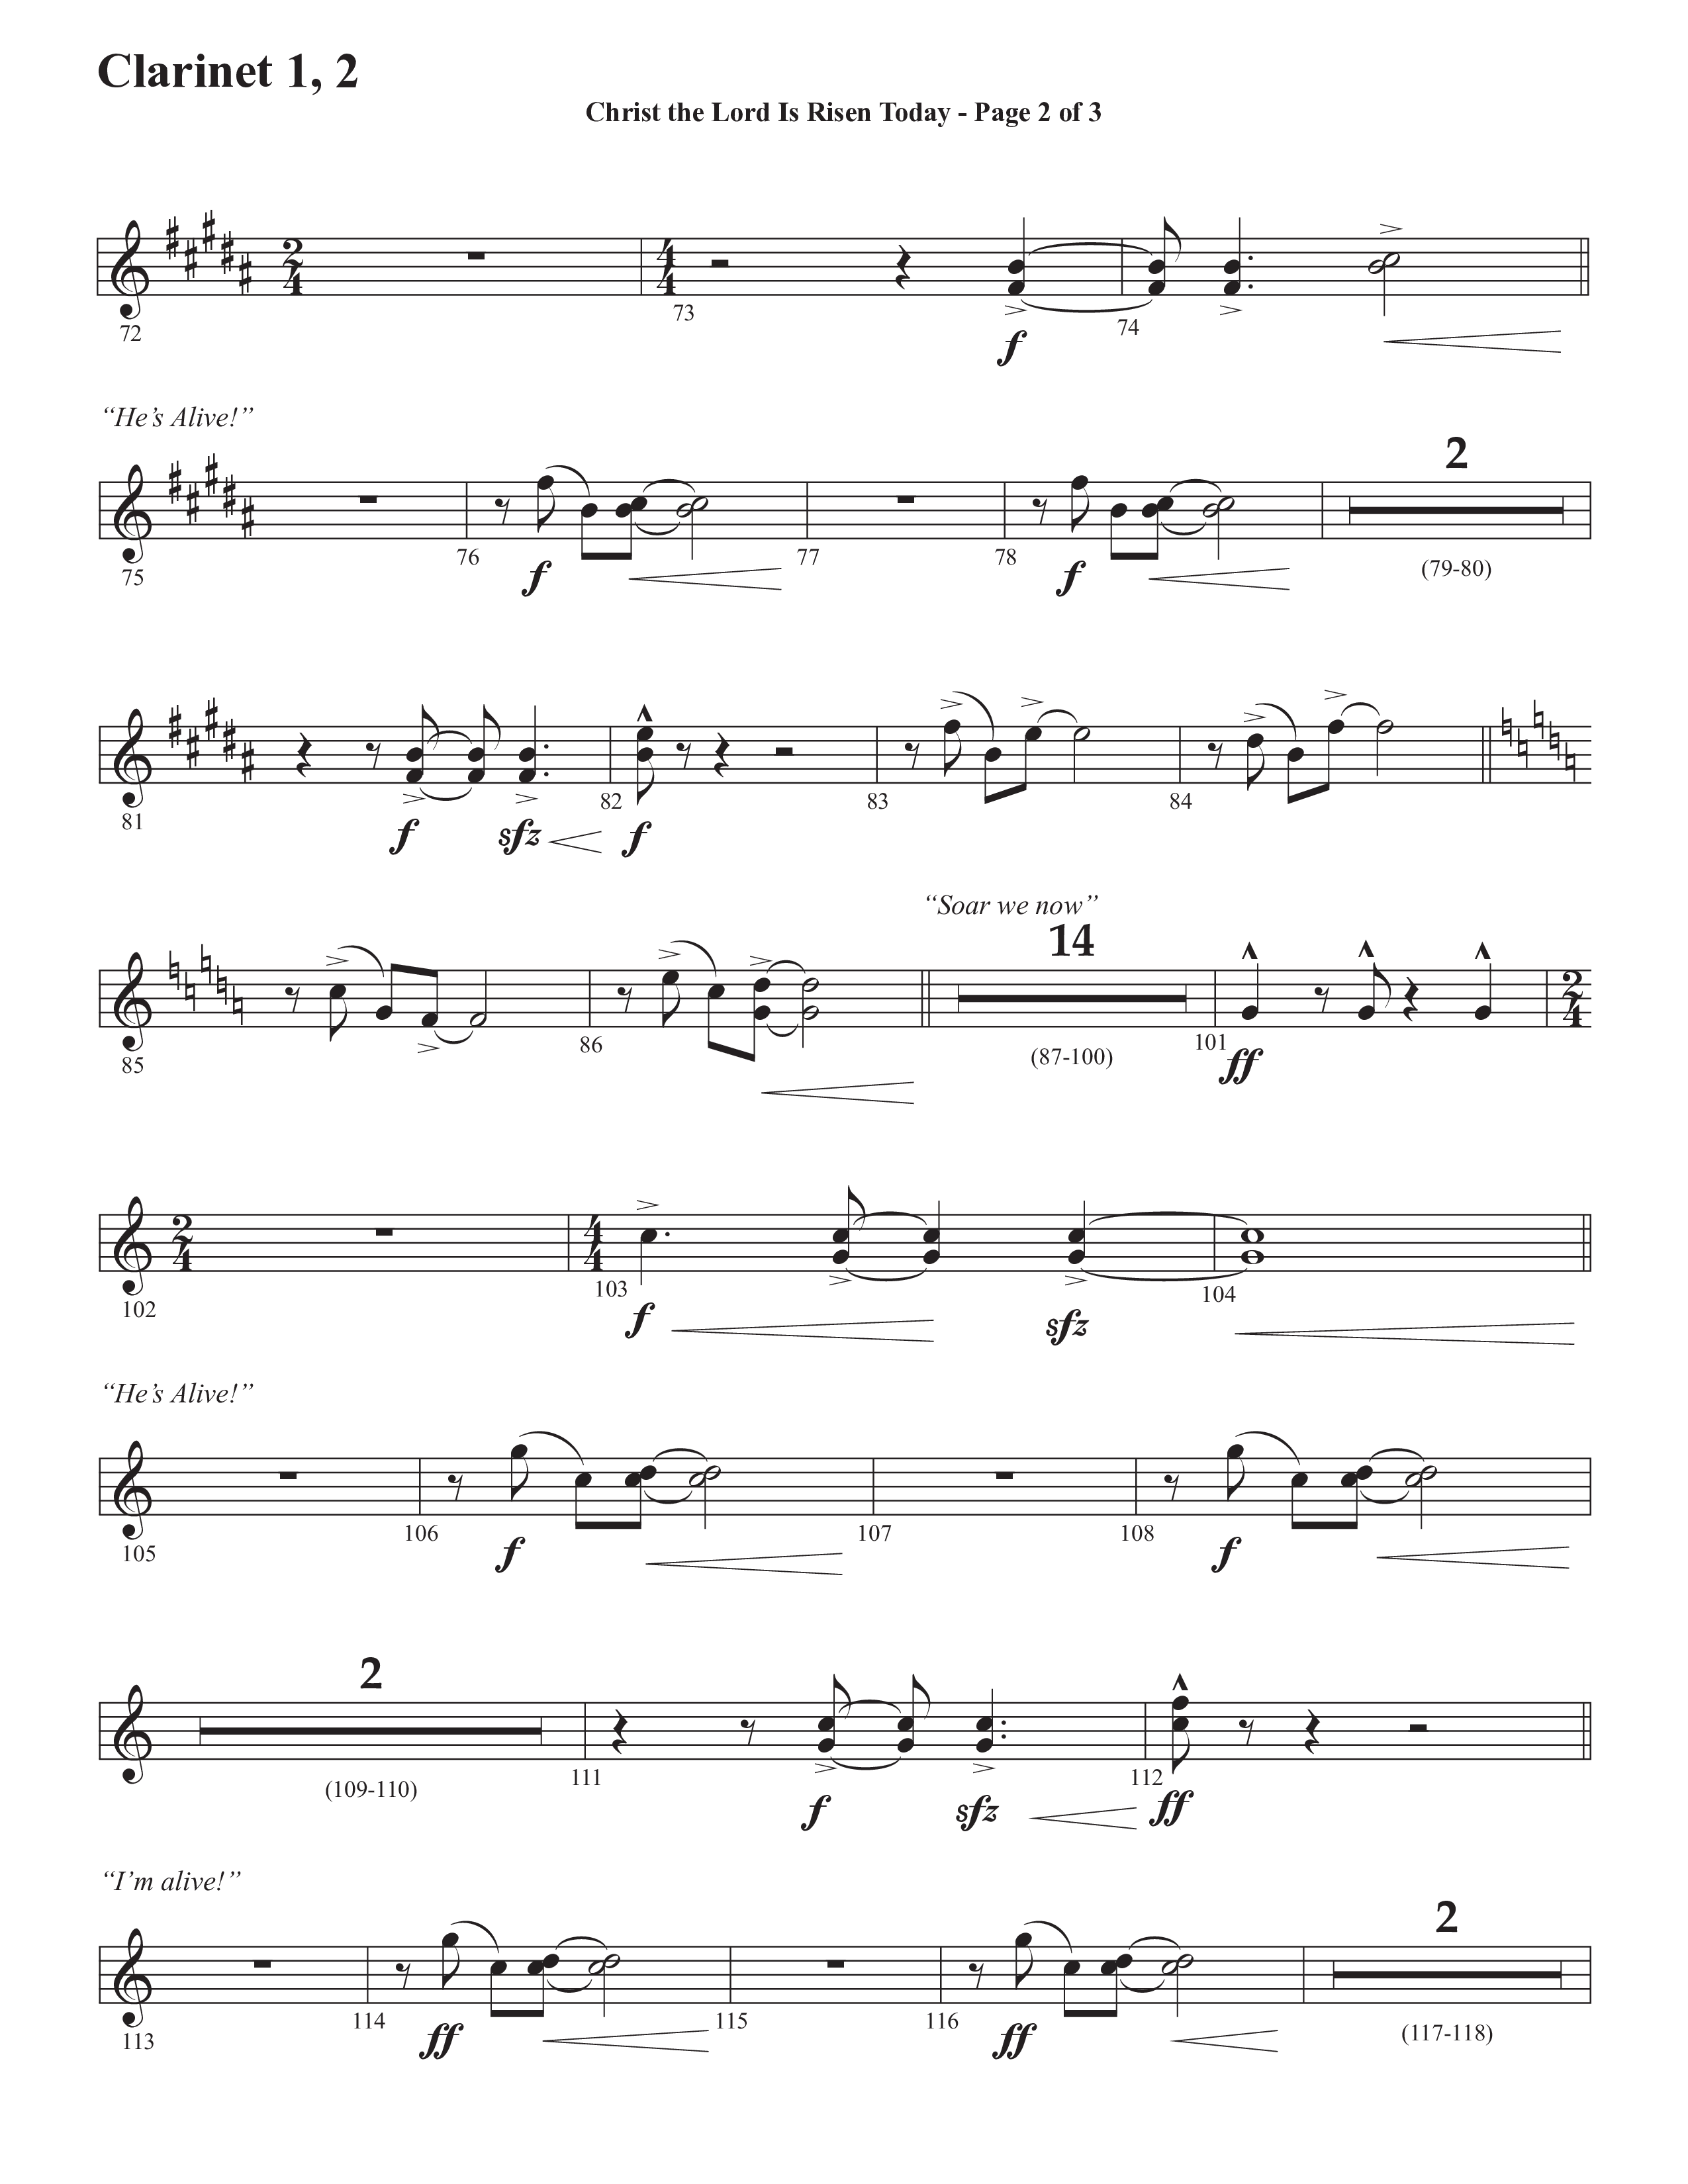 Christ The Lord Is Risen Today (He's Alive) (Choral Anthem SATB) Clarinet 1/2 (Semsen Music / Arr. John Bolin / Orch. Cliff Duren)